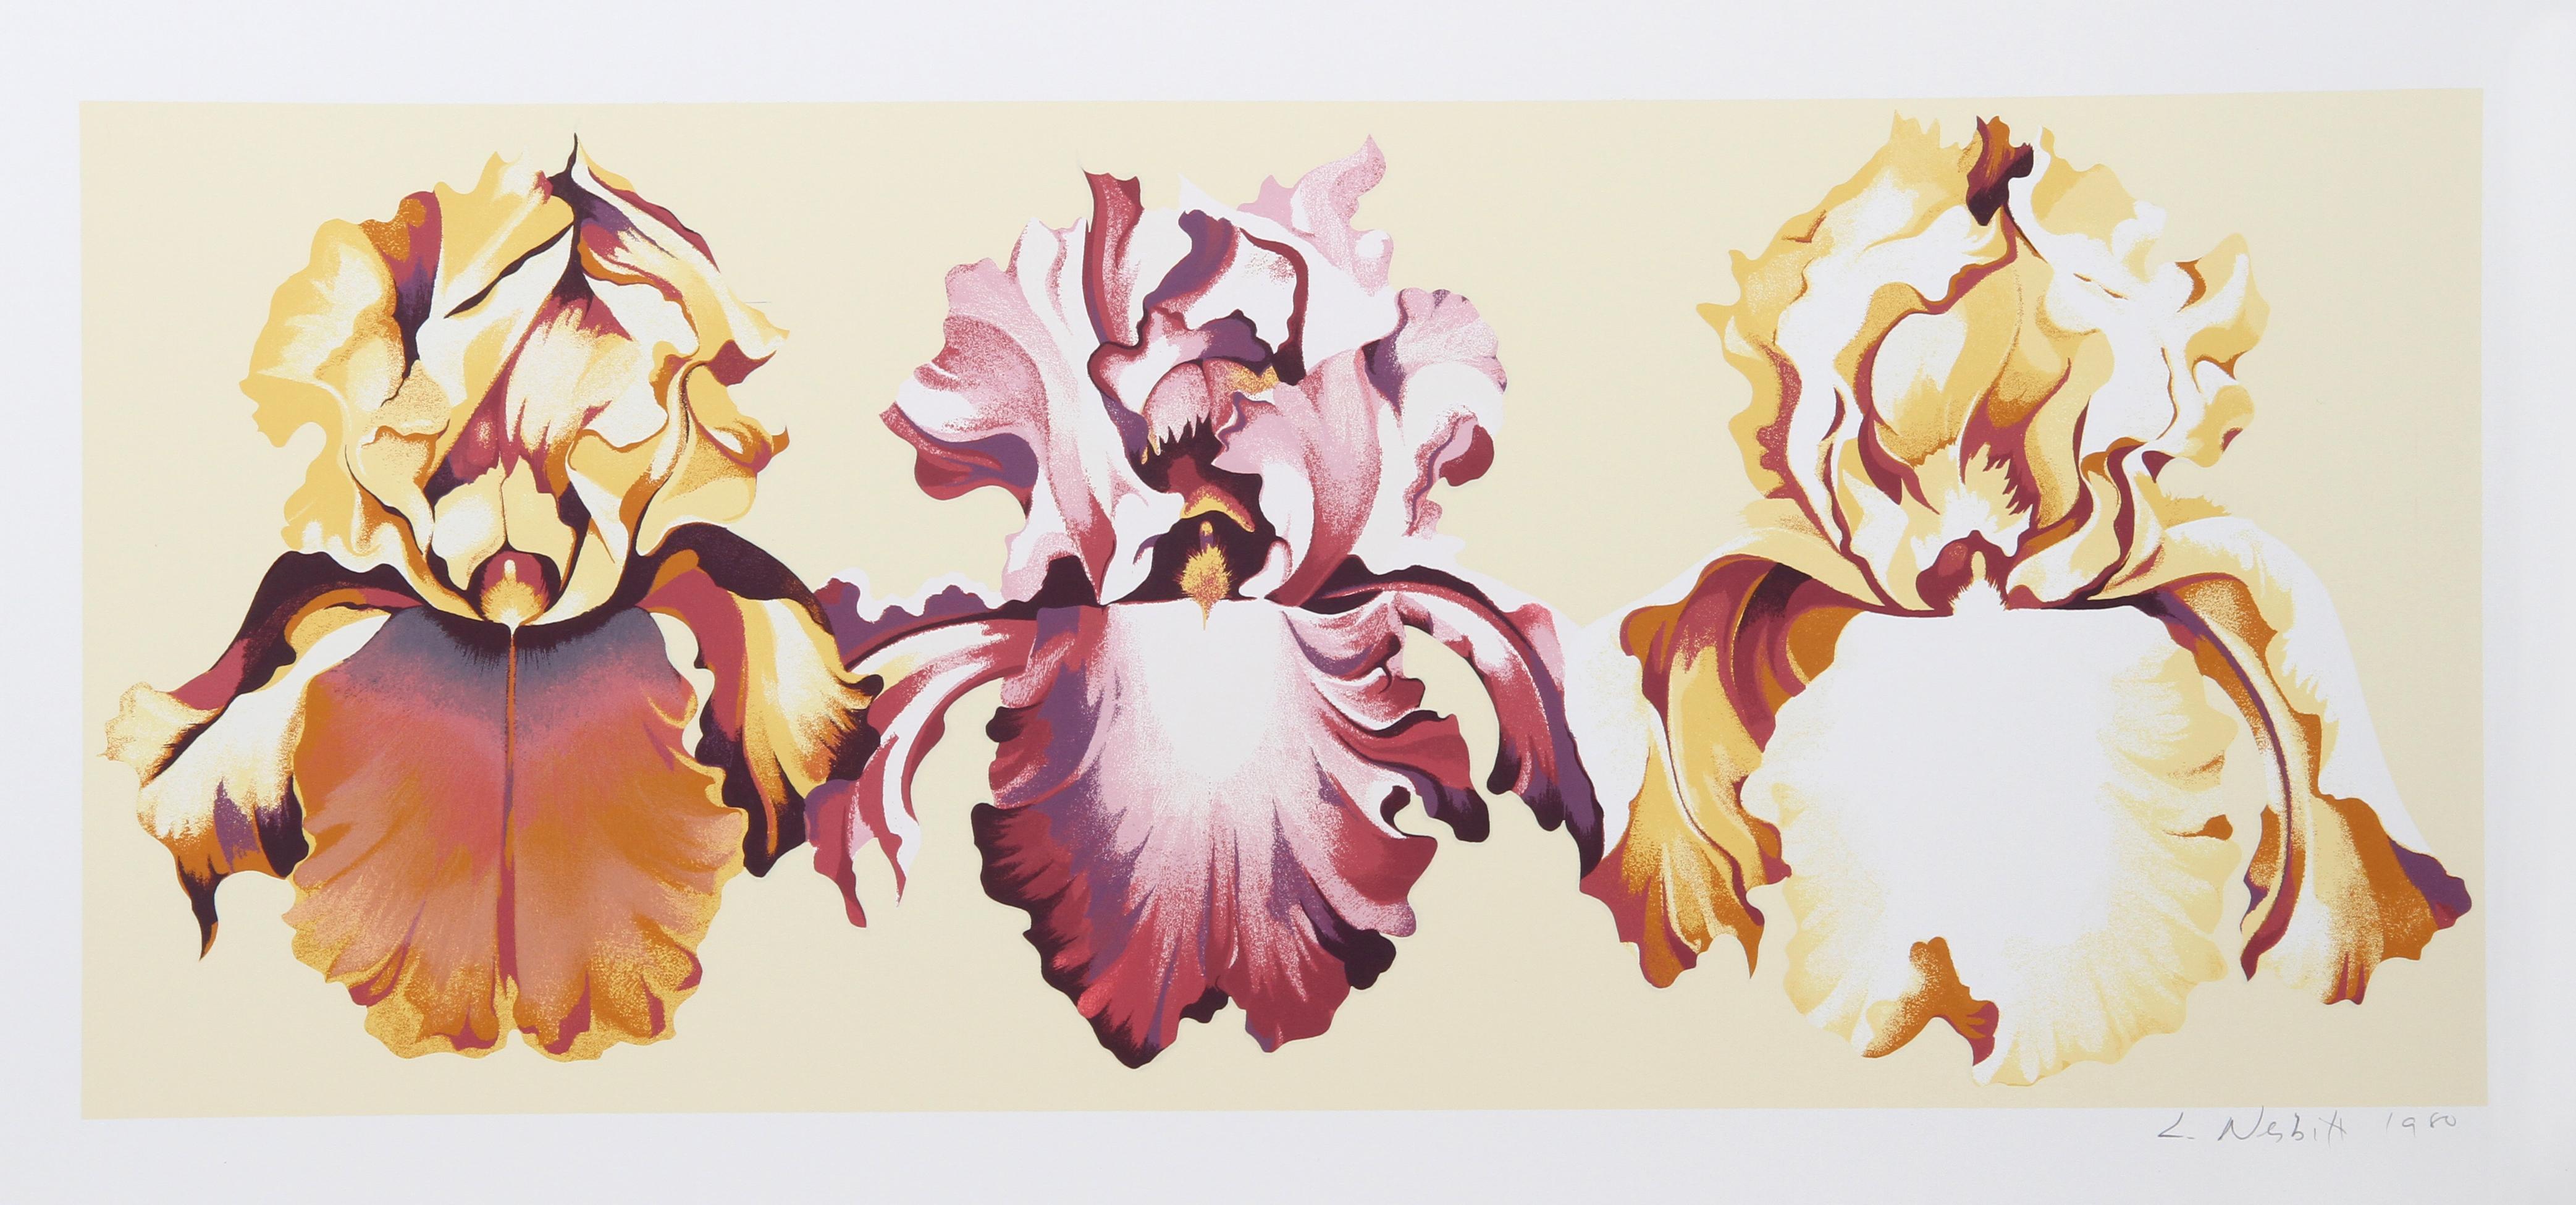 Artist: Lowell Blair Nesbitt, American (1933 - 1993)
Title: Three Irises on Yellow
Year: 1980
Medium: Silkscreen, signed and numbered in pencil
Edition: 200
Image Size: 15.25 x 36 inches
Size: 21.5 in. x 42 in. (54.61 cm x 106.68 cm)